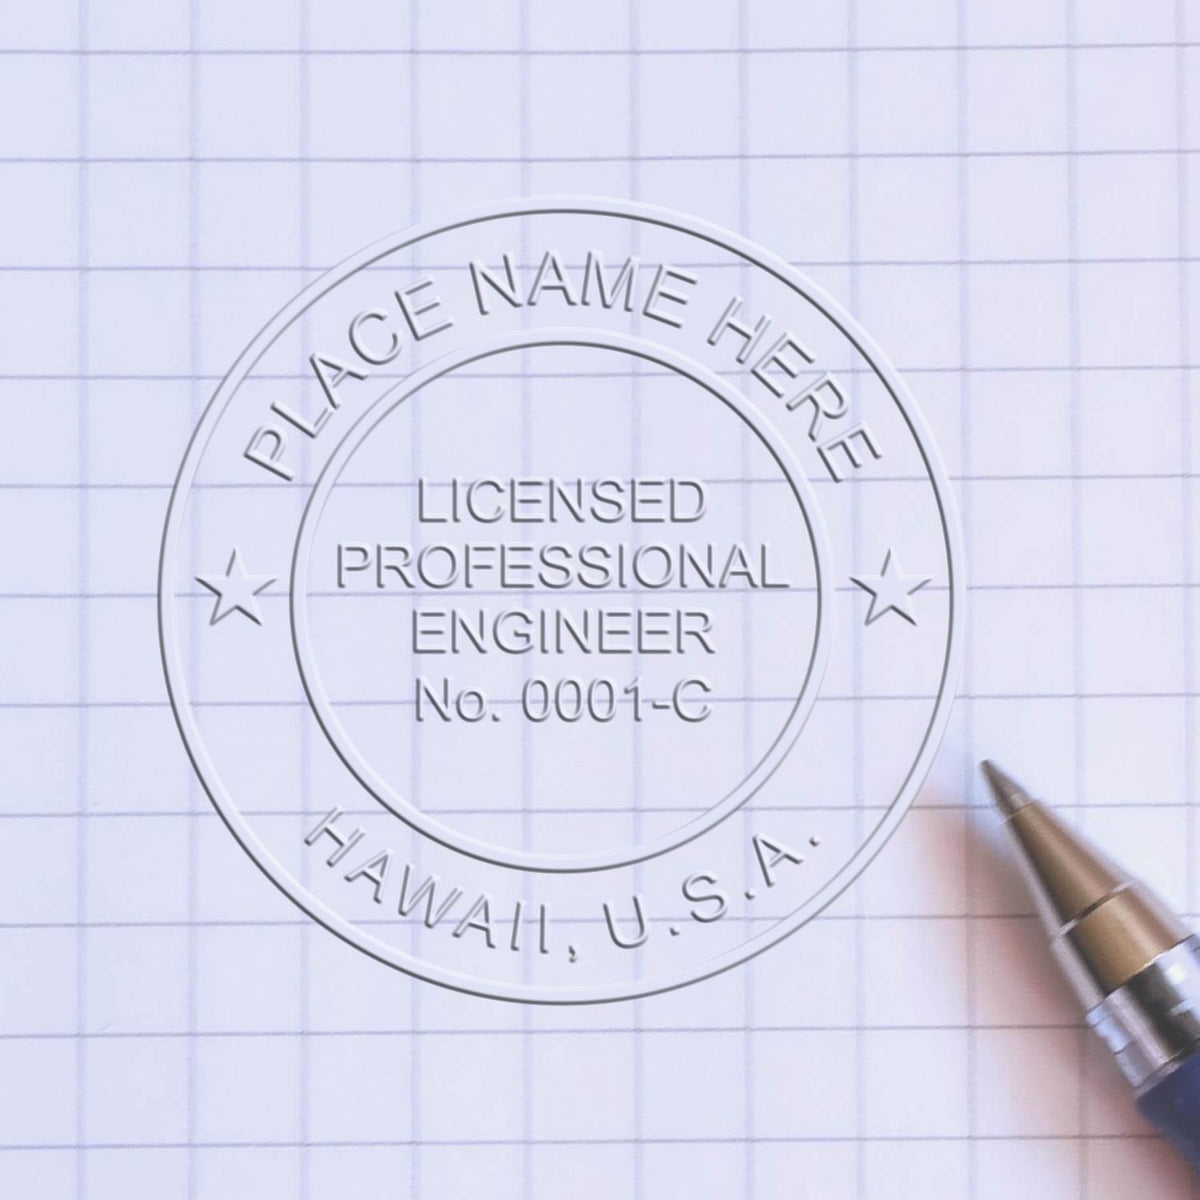 A photograph of the Hybrid Hawaii Engineer Seal stamp impression reveals a vivid, professional image of the on paper.